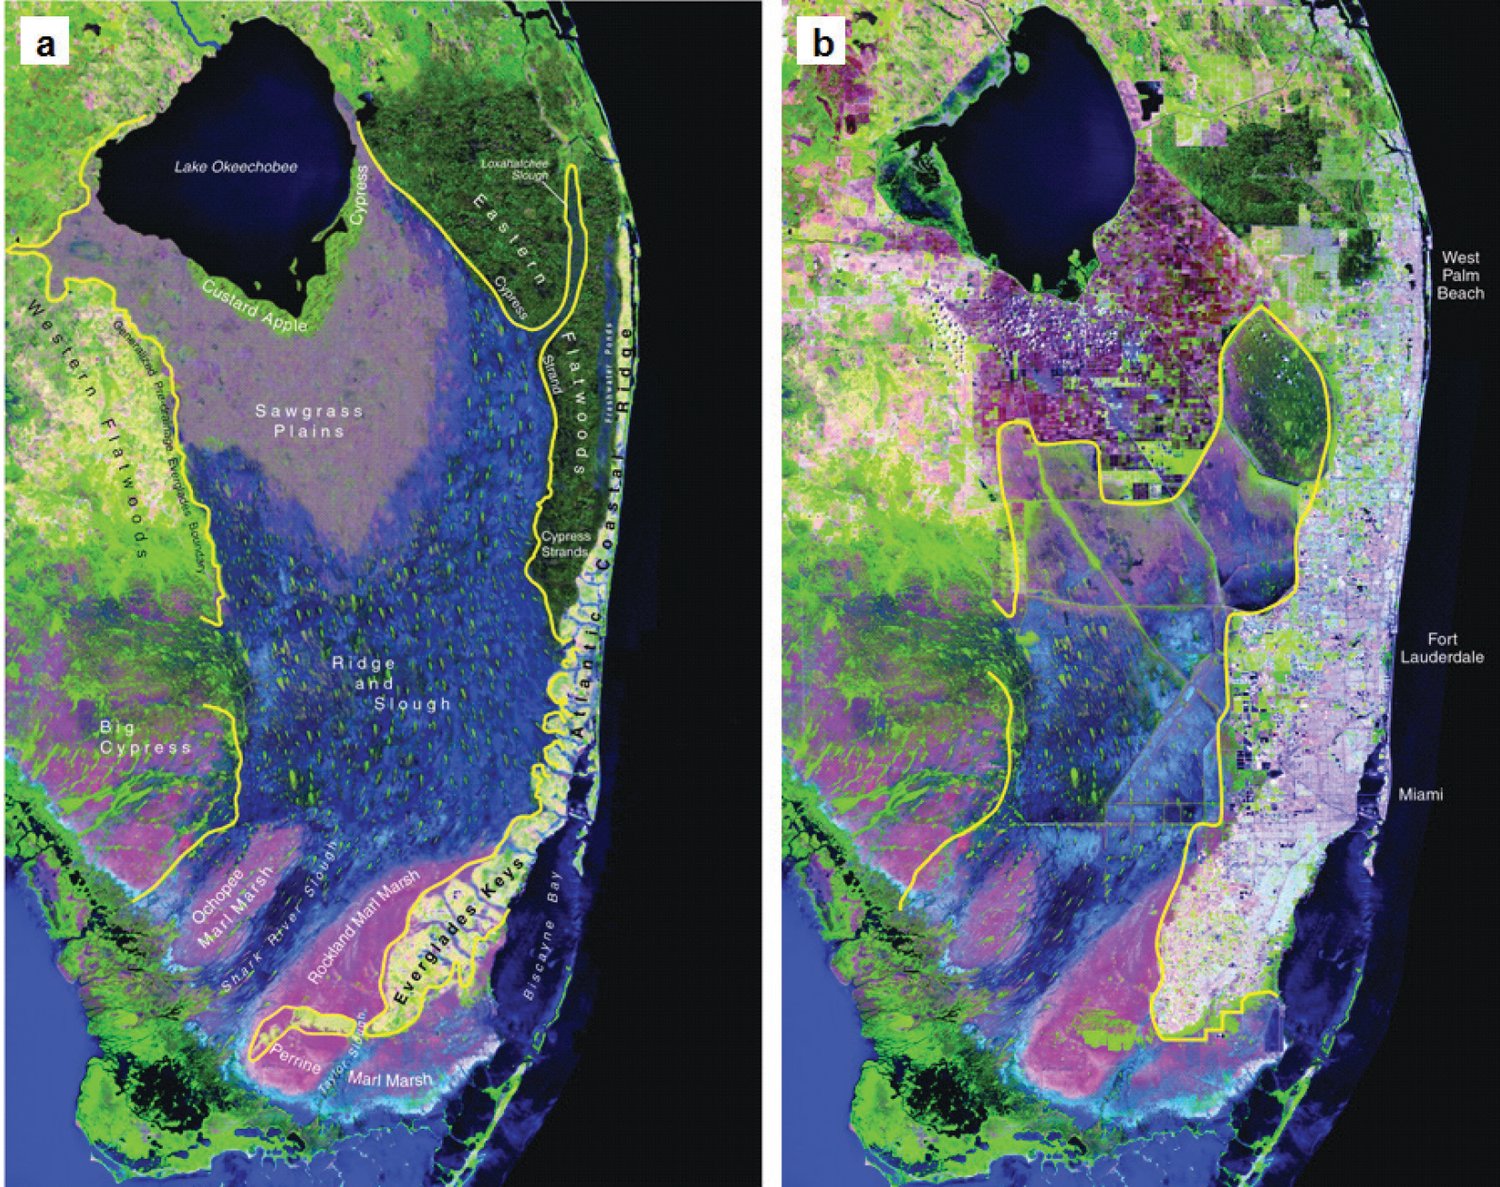 The image on the left (a) shows the pre-drainage conditions. The image on the right (b) shows current conditions. The yellow line outlines the Everglades. The area just south of Lake Okeechobee is the EAA.